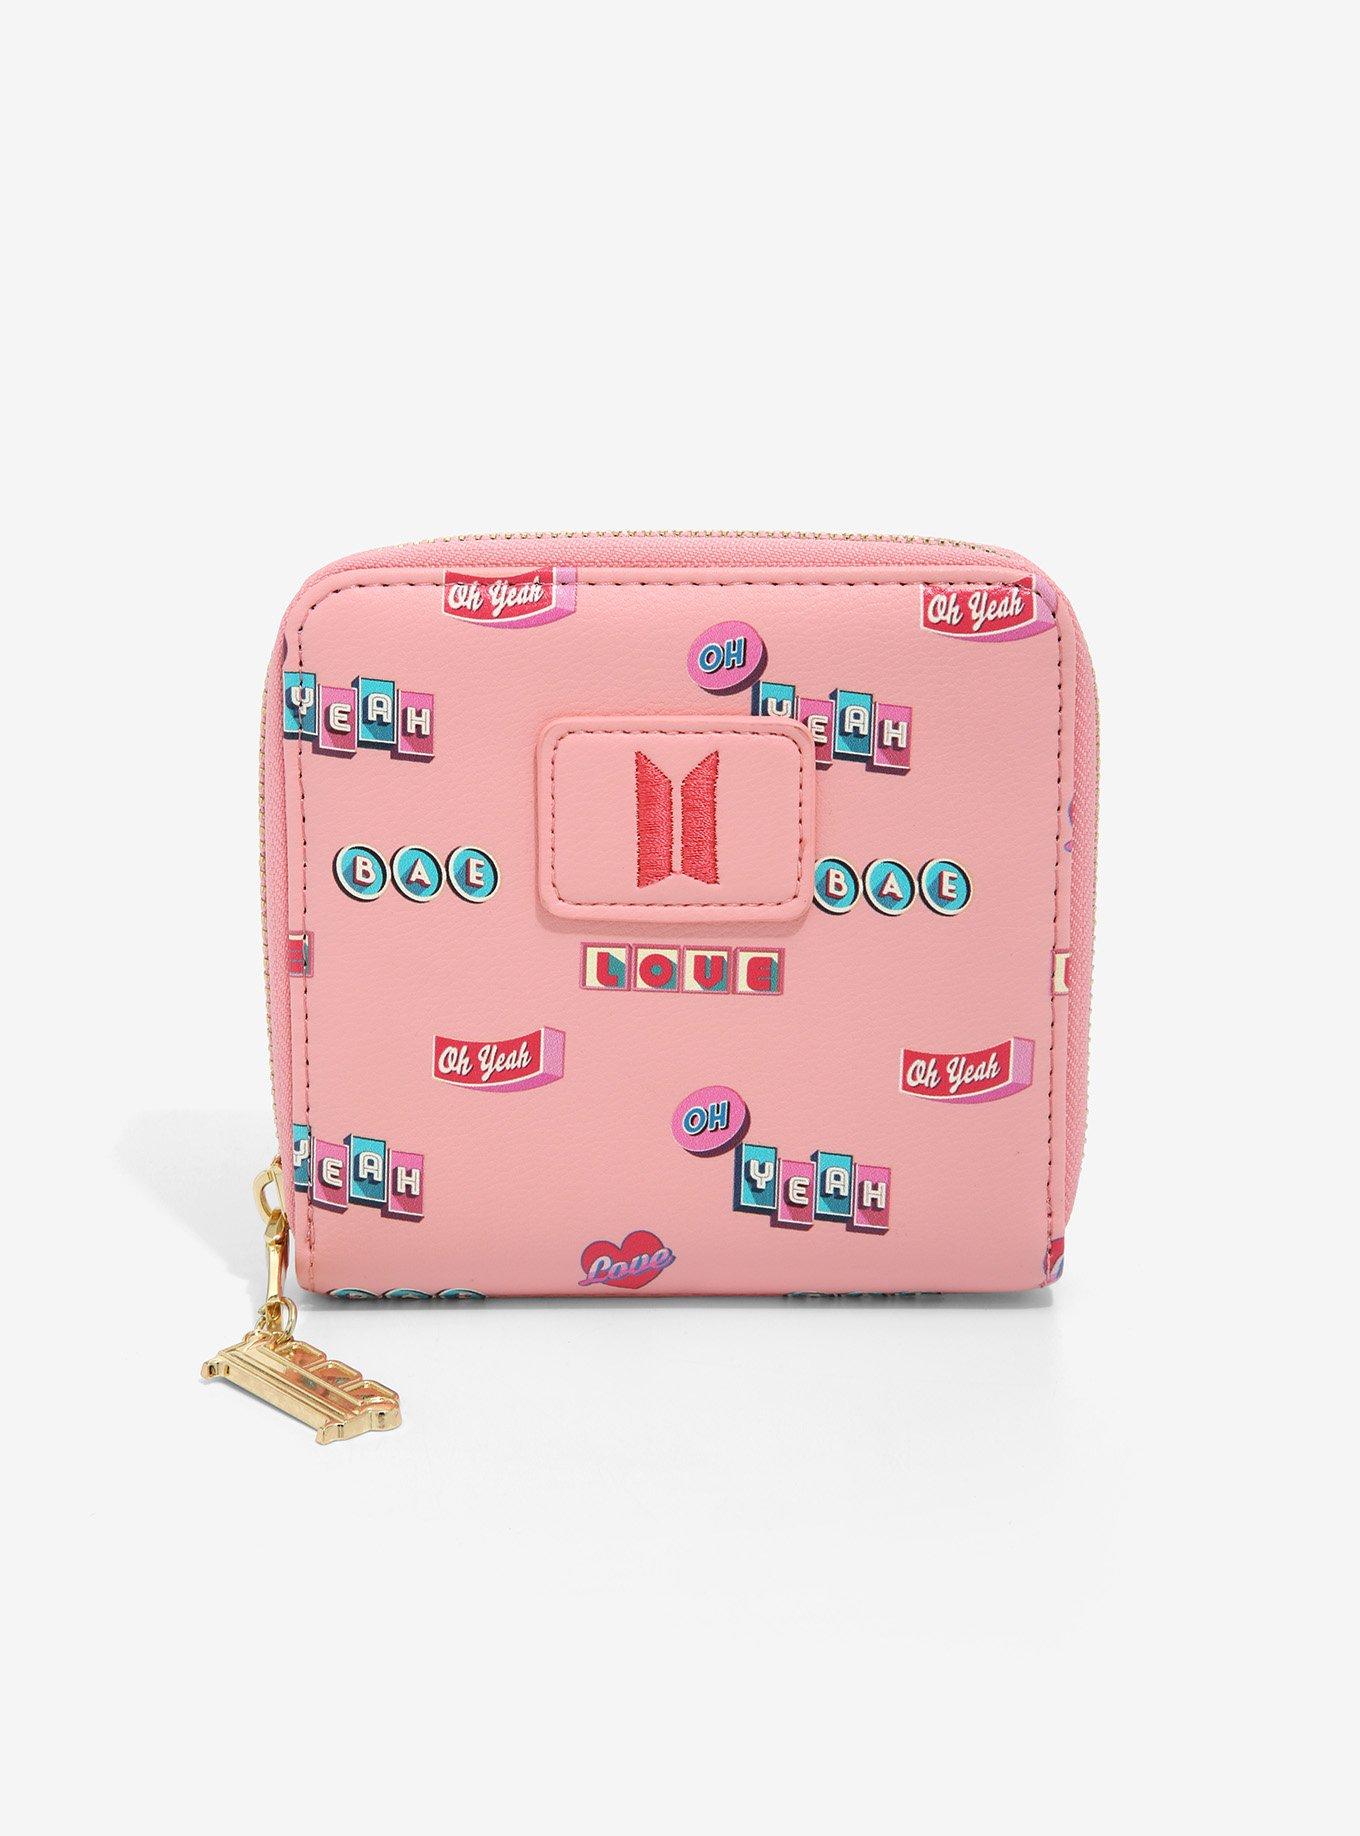 BTS Band with Hearts Wallet